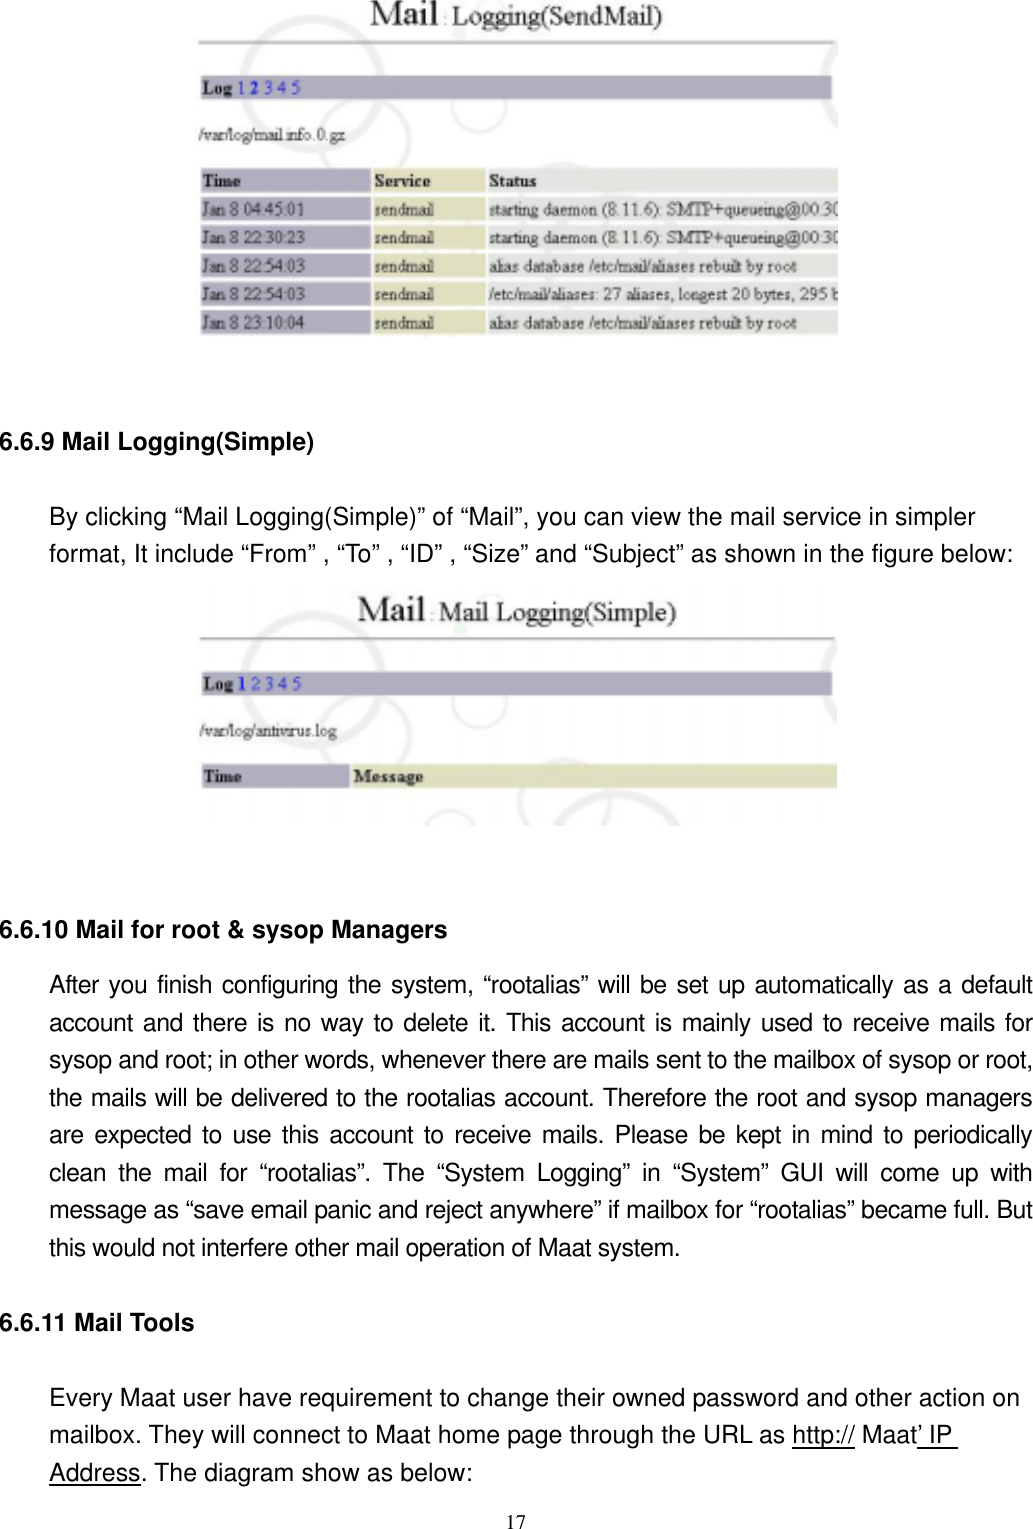  17  6.6.9 Mail Logging(Simple)     By clicking “Mail Logging(Simple)” of “Mail”, you can view the mail service in simpler format, It include “From” , “To” , “ID” , “Size” and “Subject” as shown in the figure below:        6.6.10 Mail for root &amp; sysop Managers After you finish configuring the system, “rootalias” will be set up automatically as a default account and there is no way to delete it. This account is mainly used to receive mails for sysop and root; in other words, whenever there are mails sent to the mailbox of sysop or root, the mails will be delivered to the rootalias account. Therefore the root and sysop managers are expected to use this account to receive mails. Please be kept in mind to periodically clean the mail for “rootalias”. The “System Logging” in “System” GUI will come up with message as “save email panic and reject anywhere” if mailbox for “rootalias” became full. But this would not interfere other mail operation of Maat system. 6.6.11 Mail Tools     Every Maat user have requirement to change their owned password and other action on mailbox. They will connect to Maat home page through the URL as http:// Maat’ IP Address. The diagram show as below: 